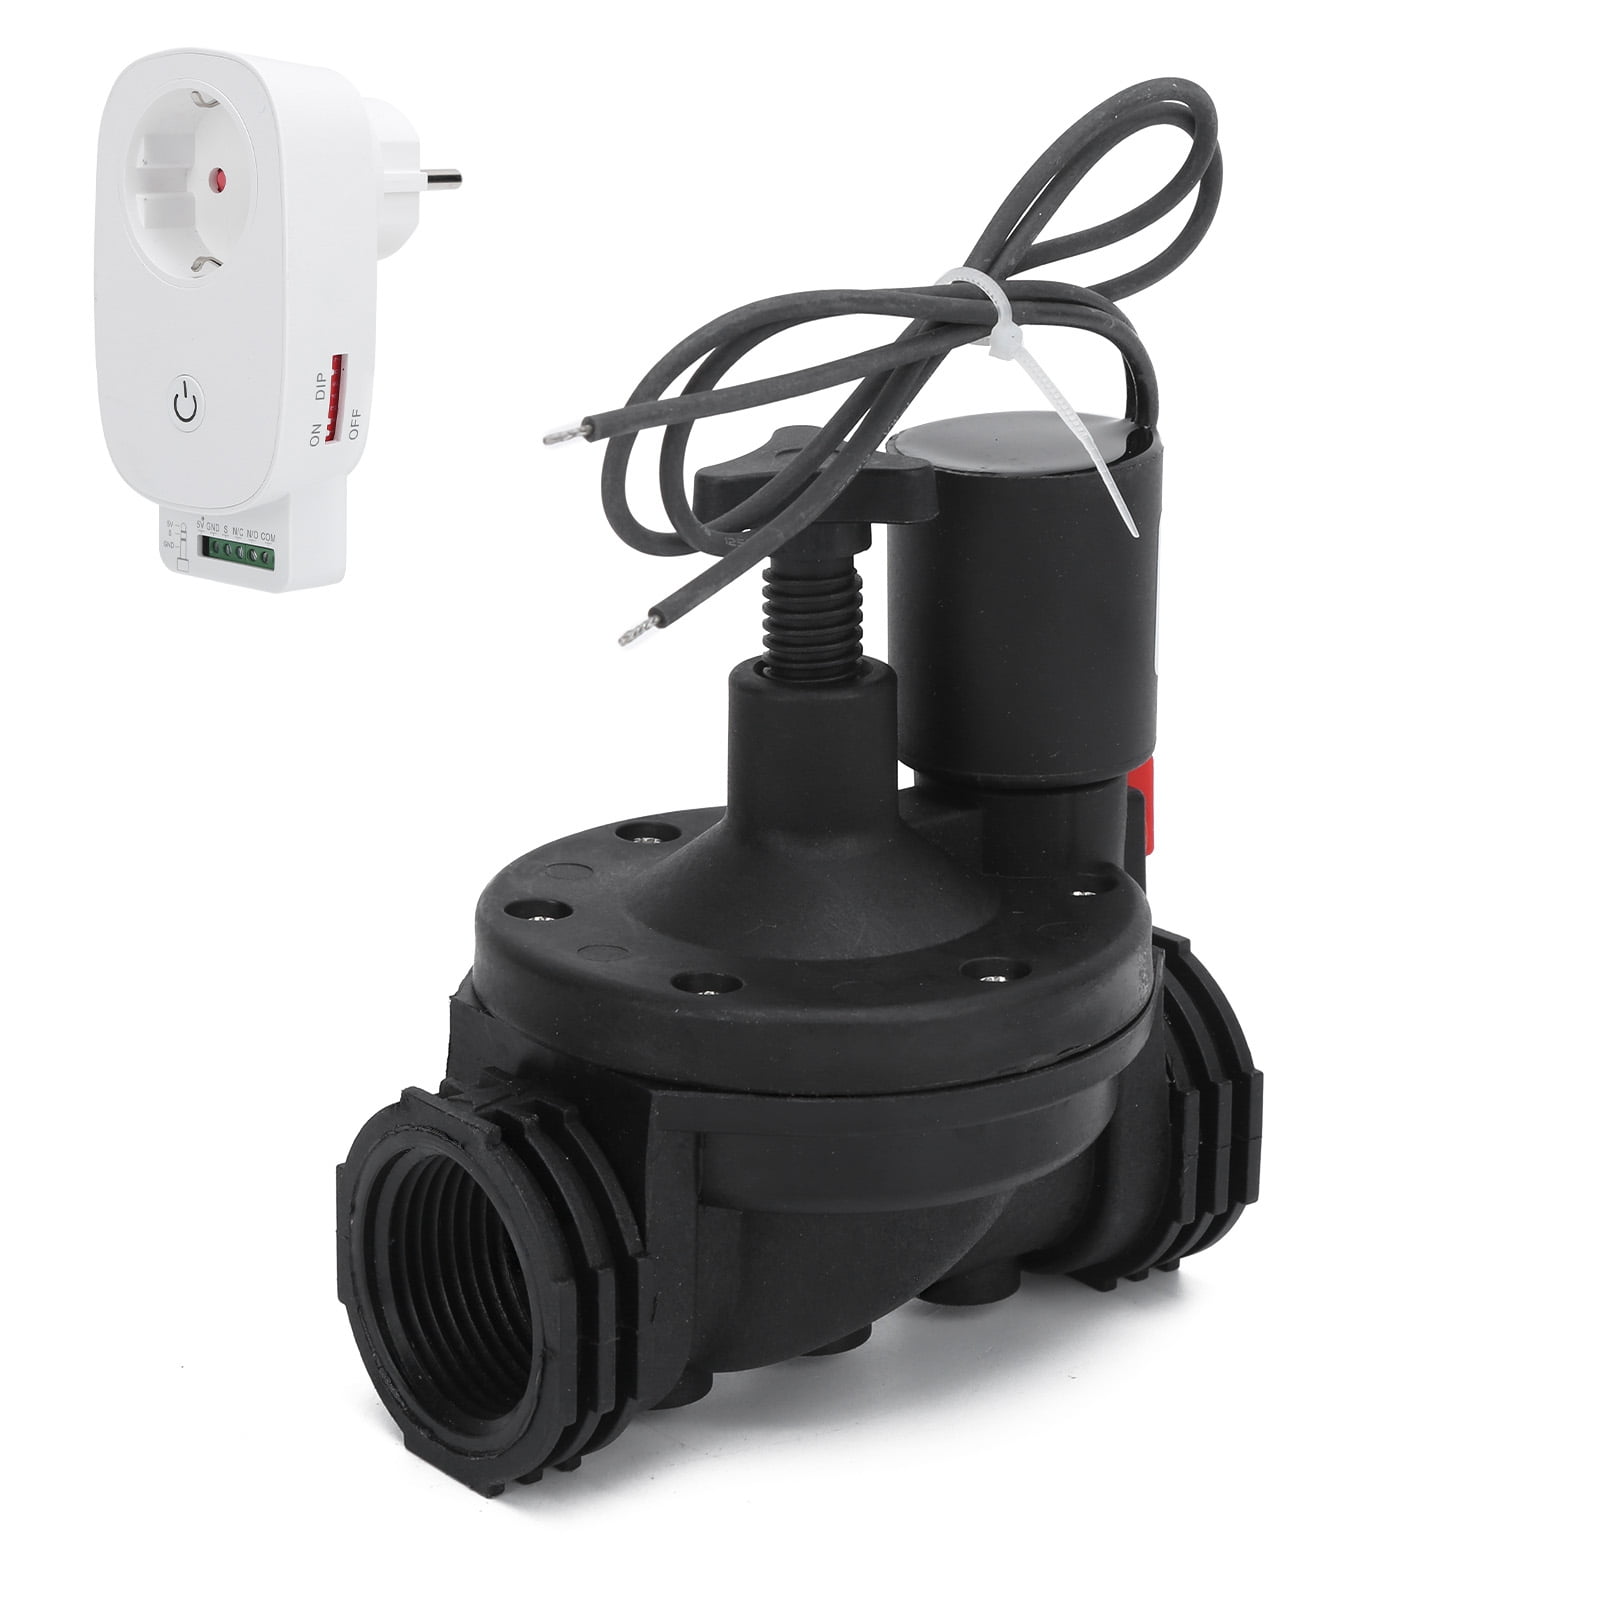 Galcon 3652 Sprinkler Valve with S1602 DC Latching Solenoid for Battery Operated Controllers 1.5 